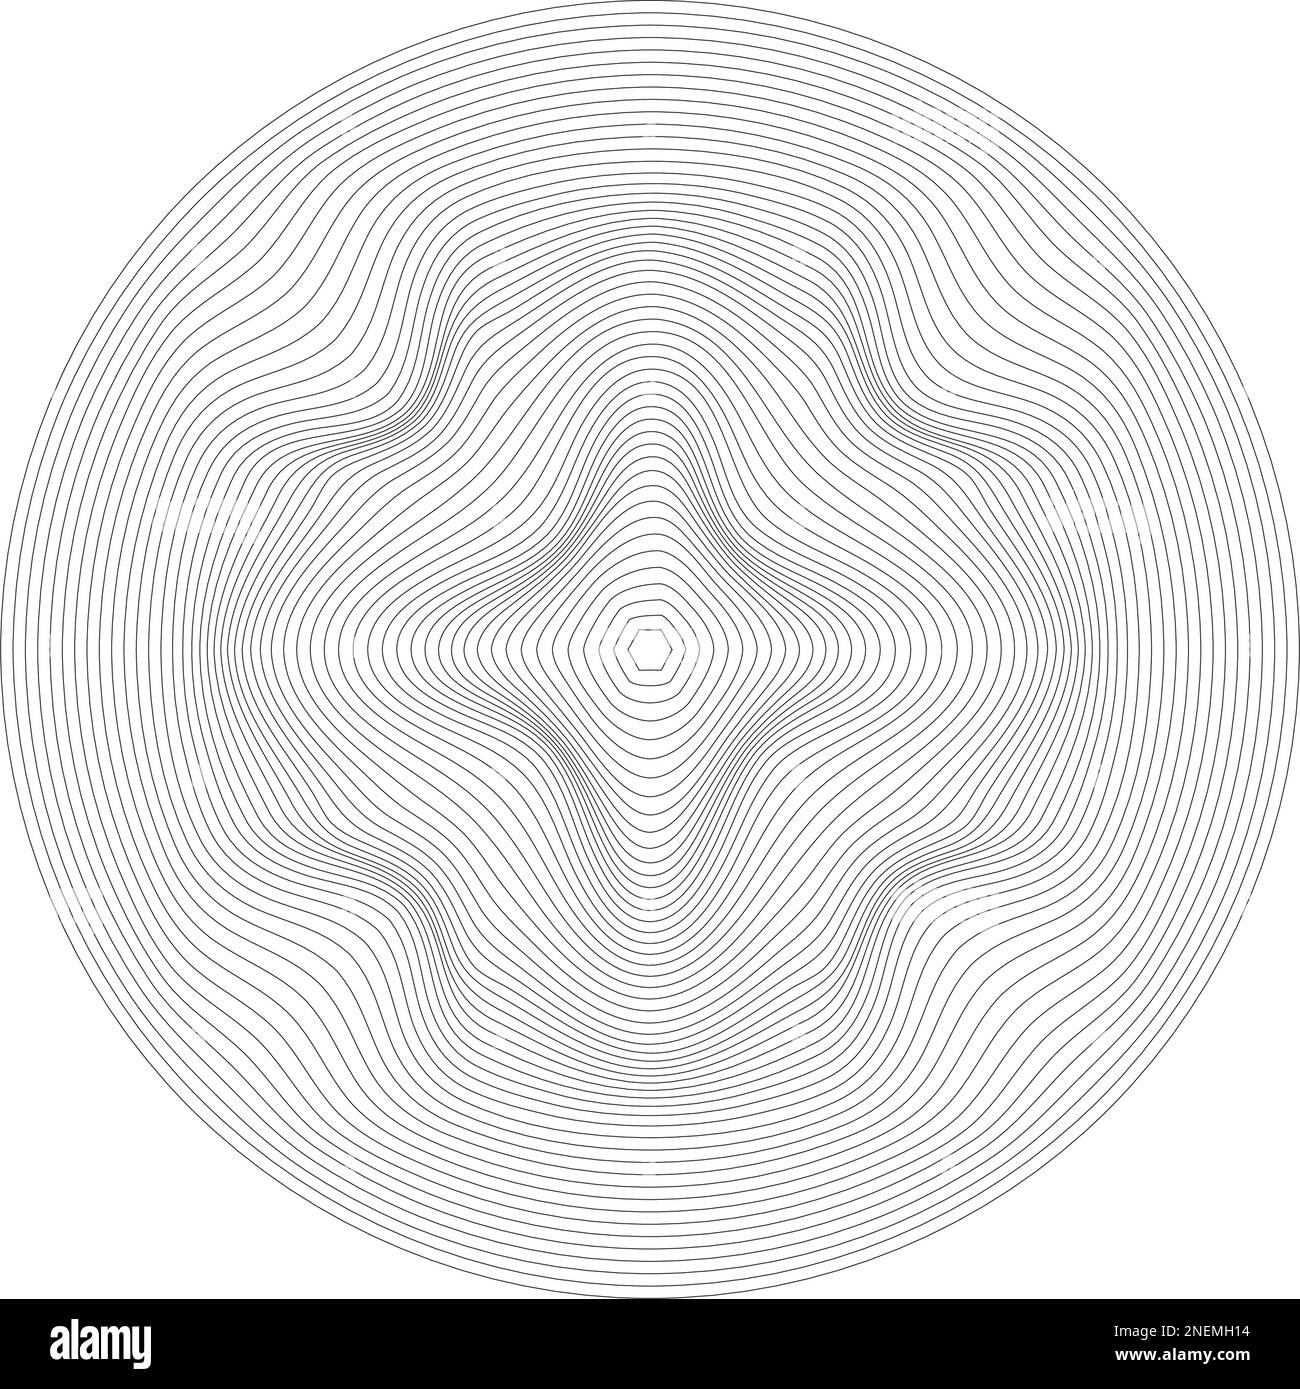 Circle lines overlay pattern in black color isolated on white background. For design elements in concept of technology, science or modern. Stock Vector